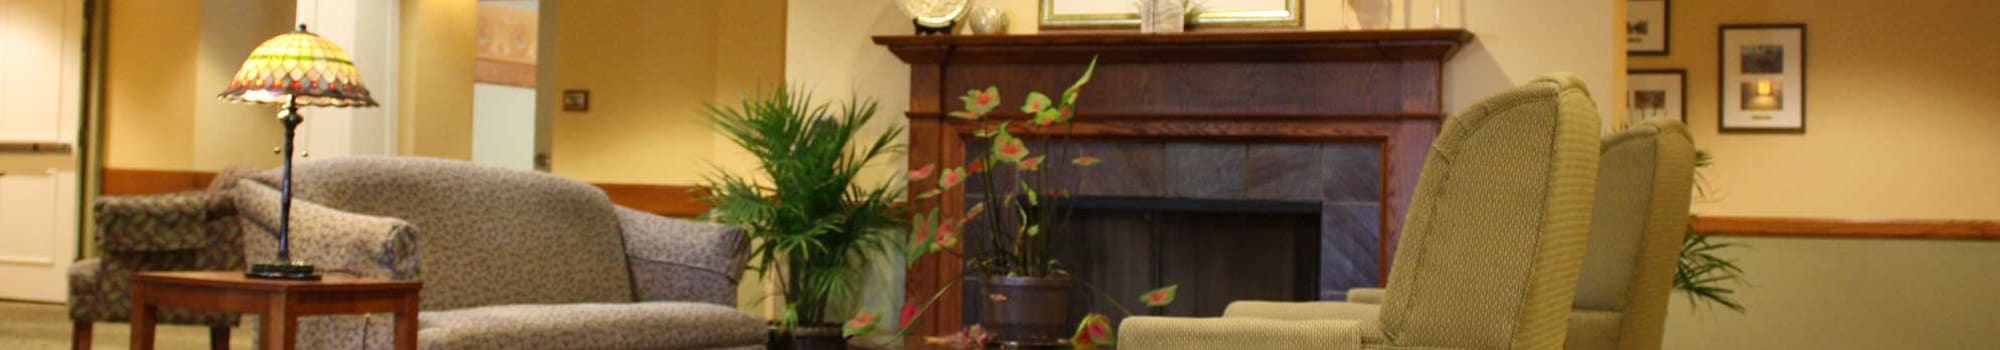 Senior living options in Park Forest, IL